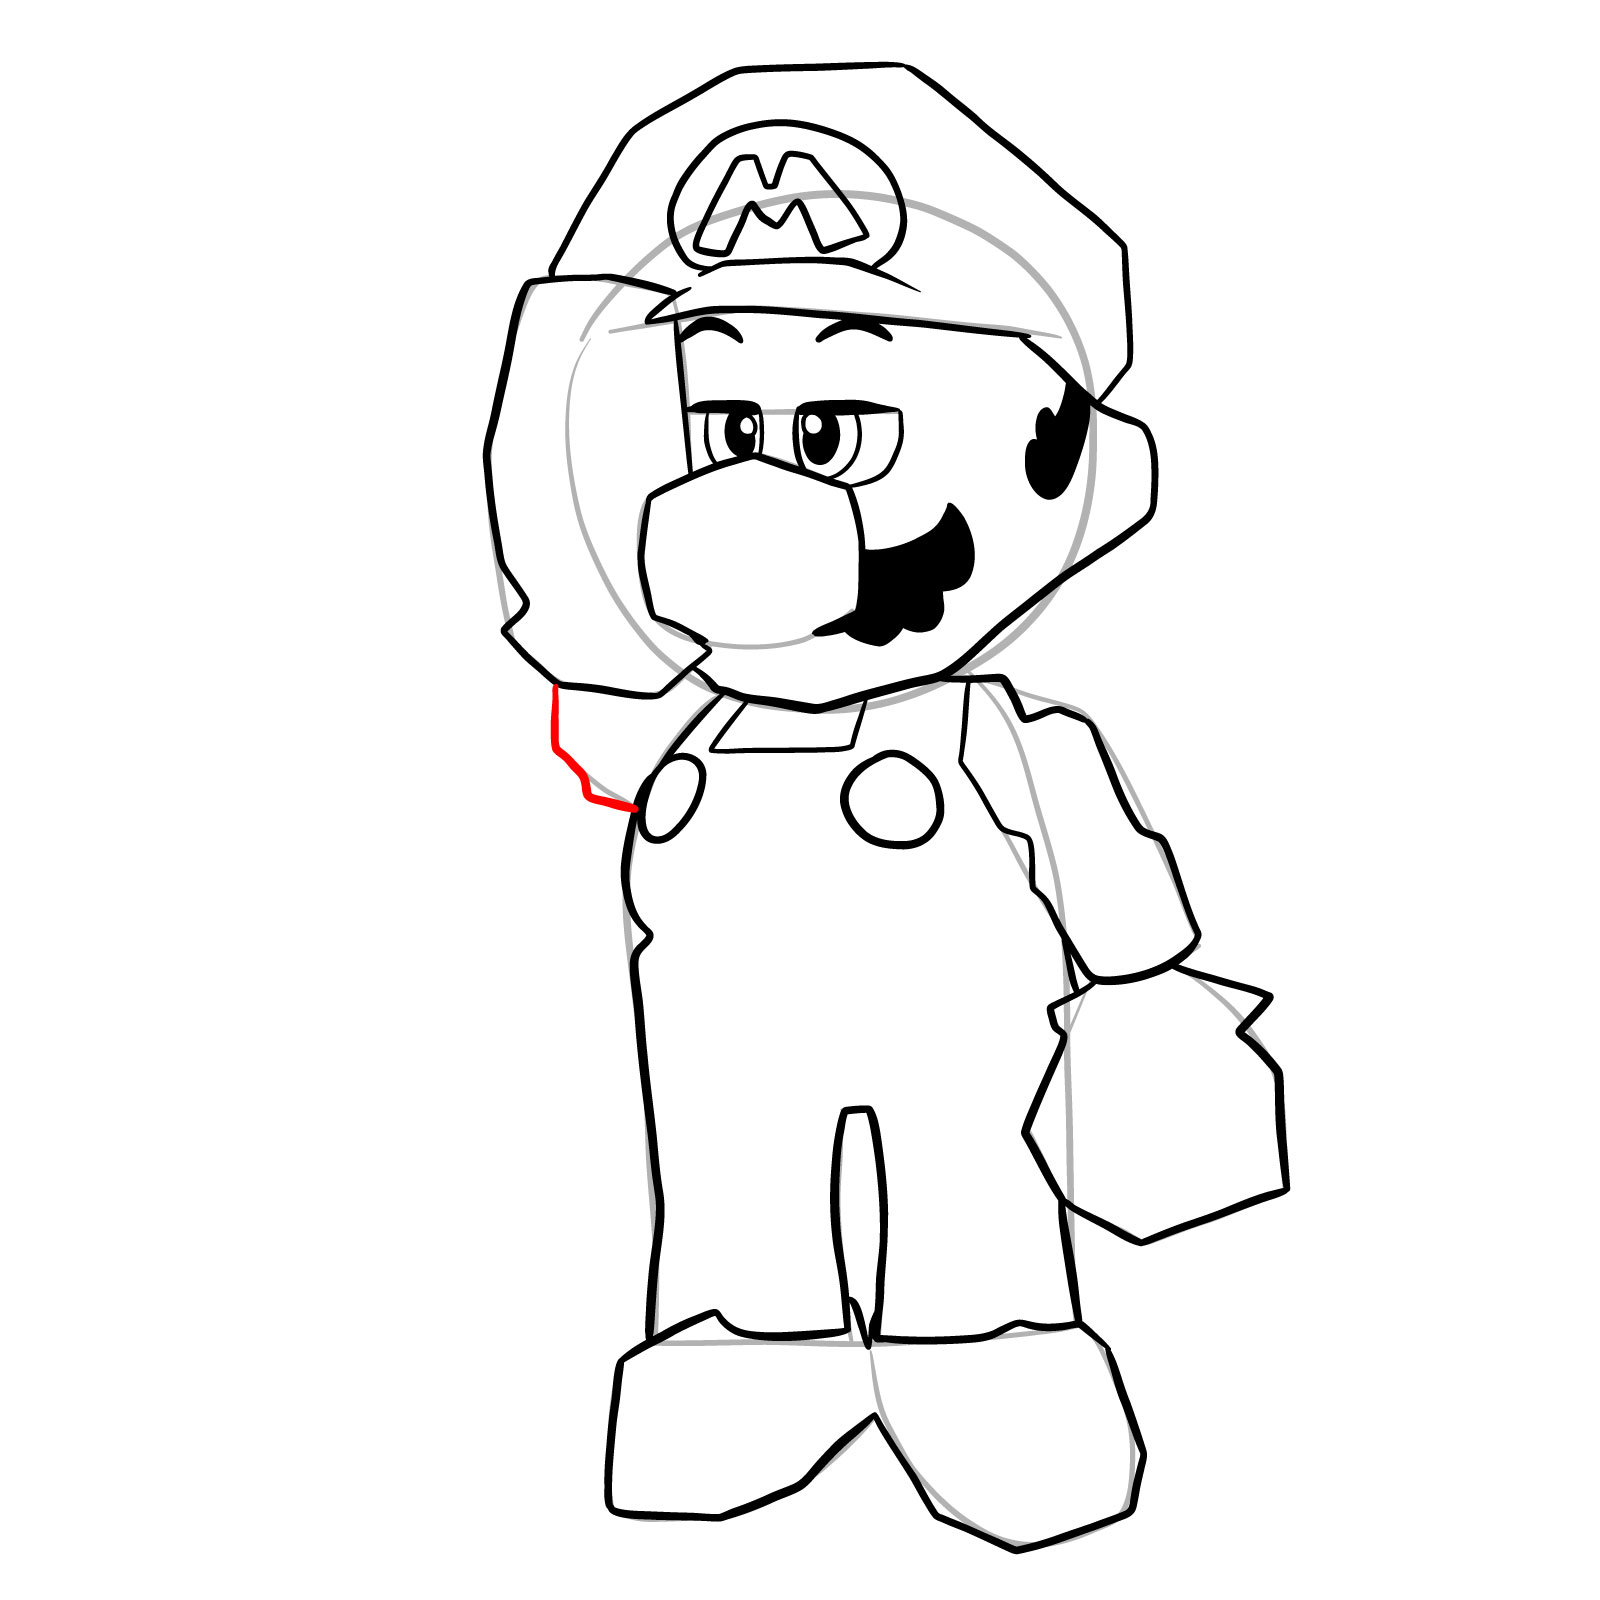 How to draw SuperMarioGlitchy4 (N64) - step 24